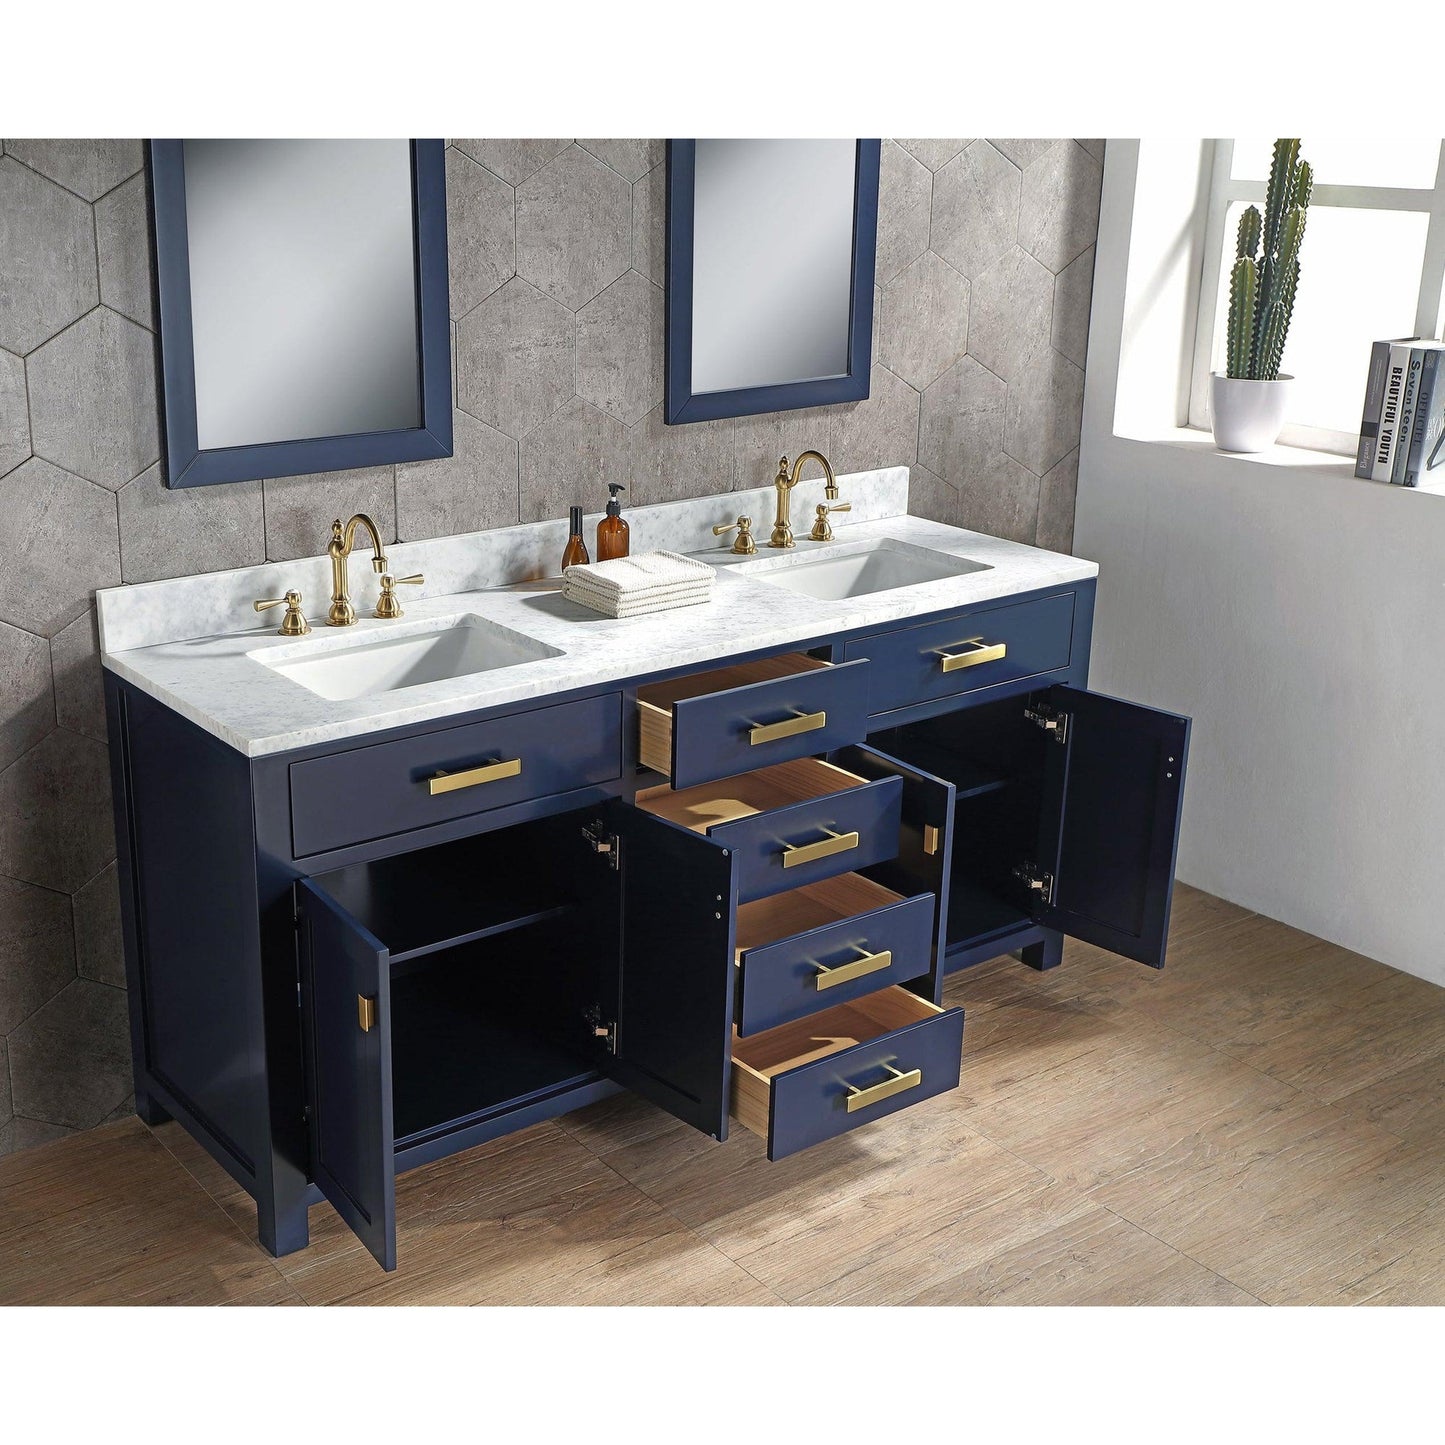 Water Creation Madison 72" Double Sink Carrara White Marble Vanity In Monarch Blue With F2-0012-06-TL Lavatory Faucet(s)